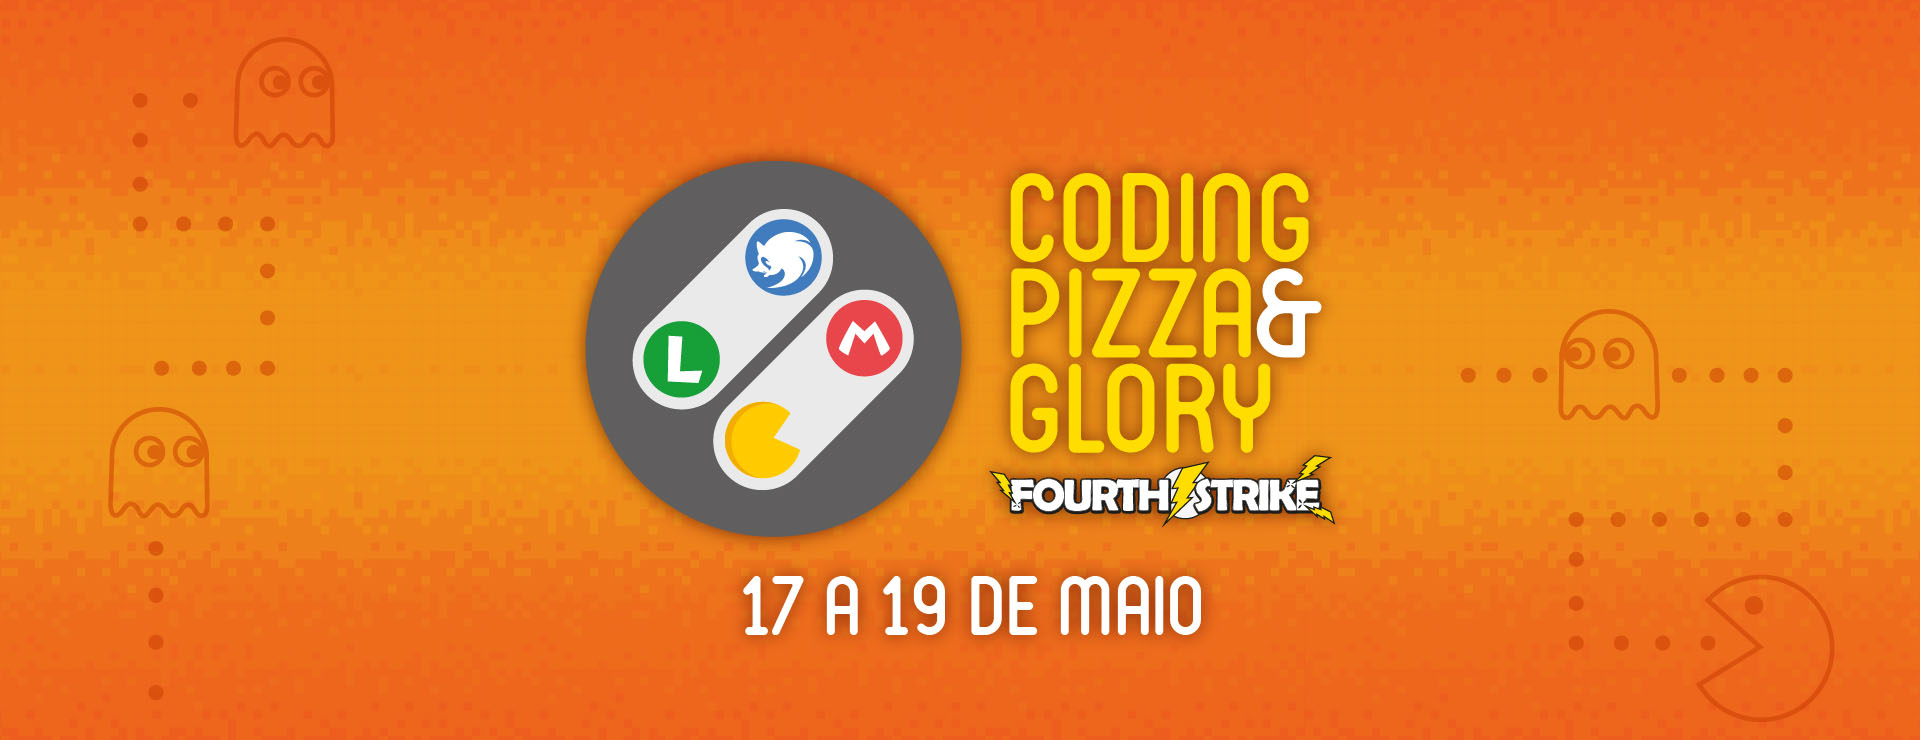 CPG - Coding Pizza & Glory